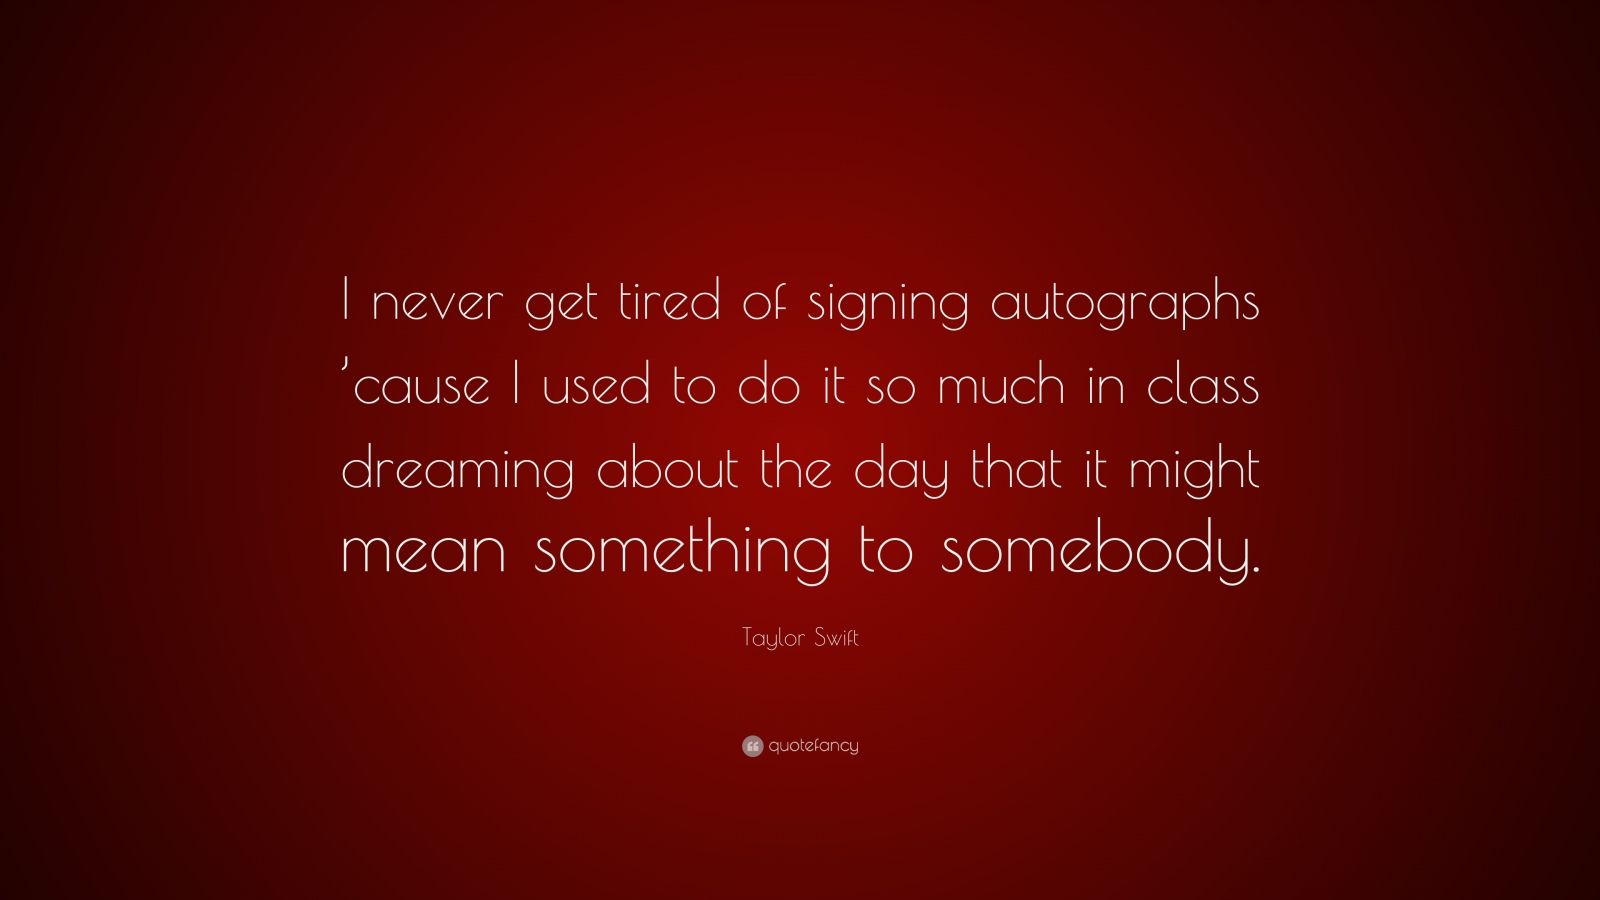 https://quotefancy.com/media/wallpaper/1600x900/540032-Taylor-Swift-Quote-I-never-get-tired-of-signing-autographs-cause-I.jpg